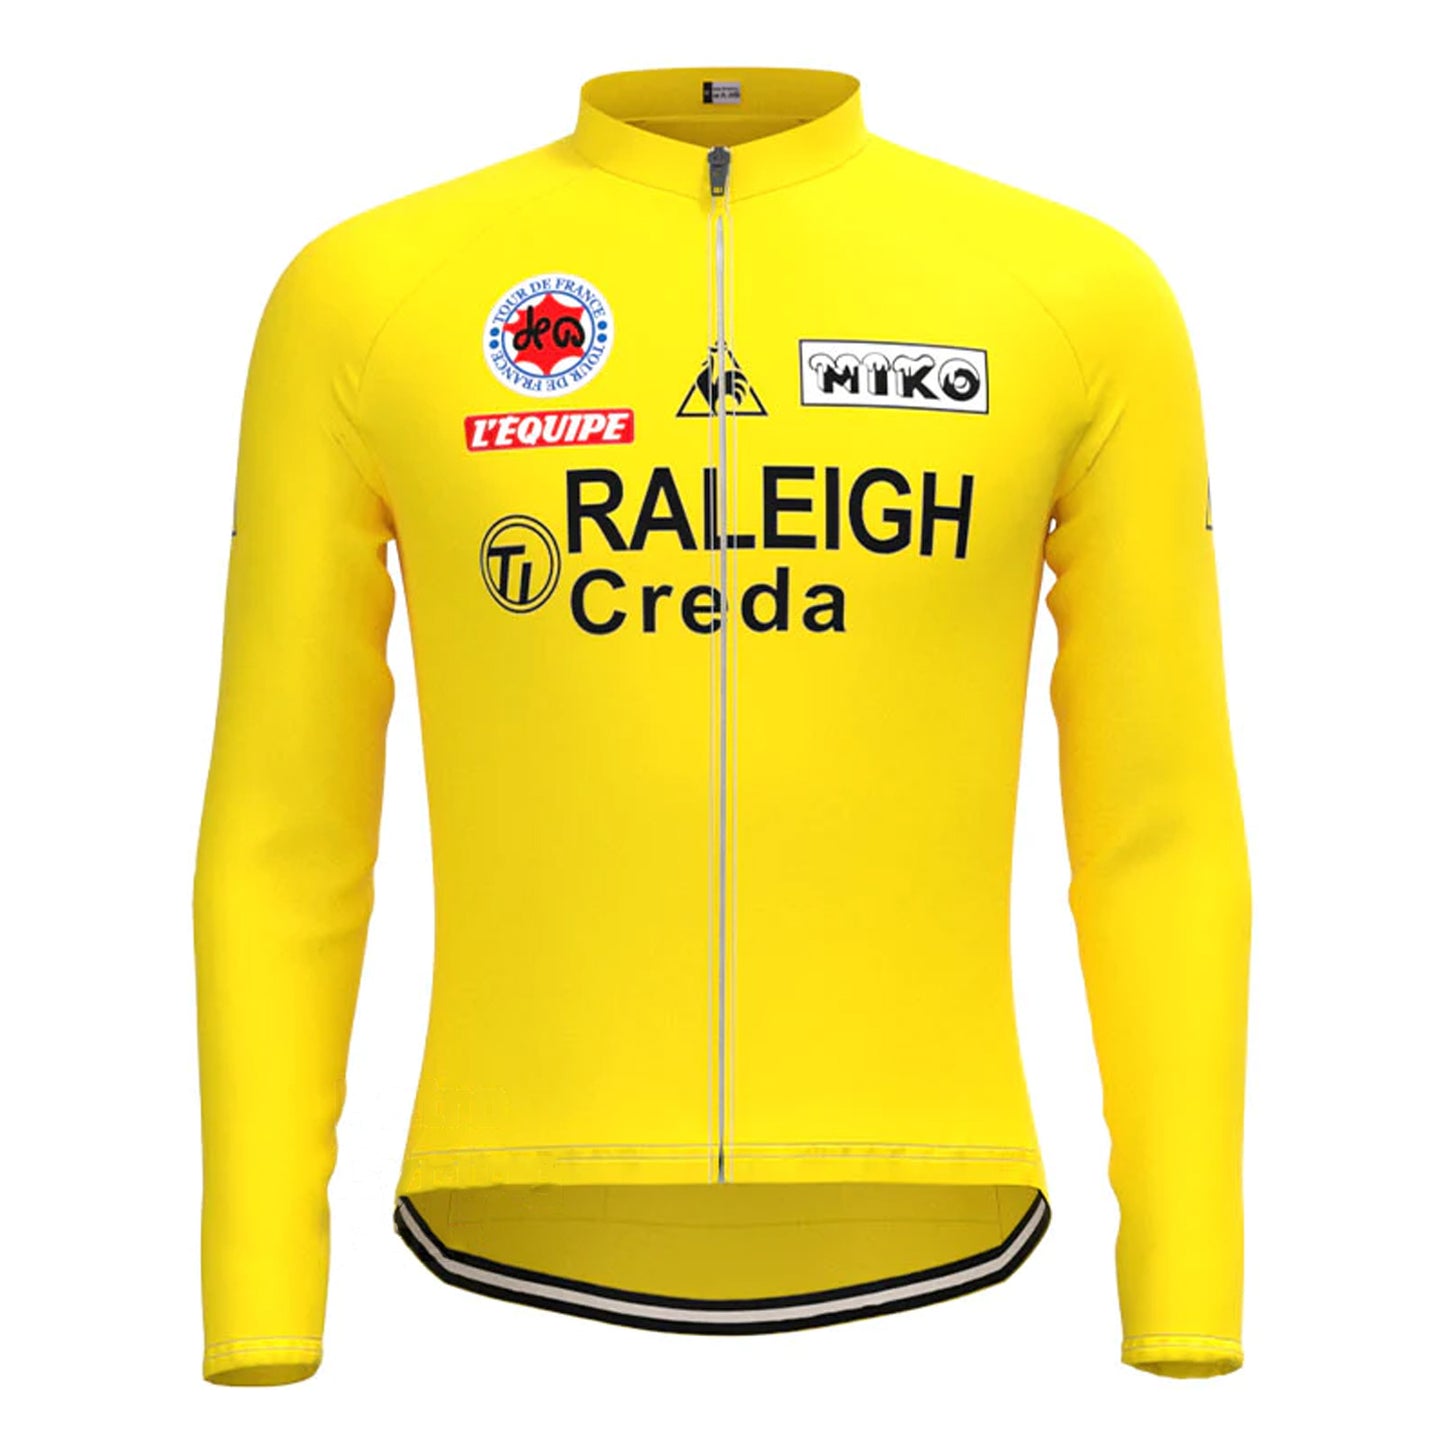 TI RALEIGH Yellow Vintage Long Sleeve Cycling Jersey Top